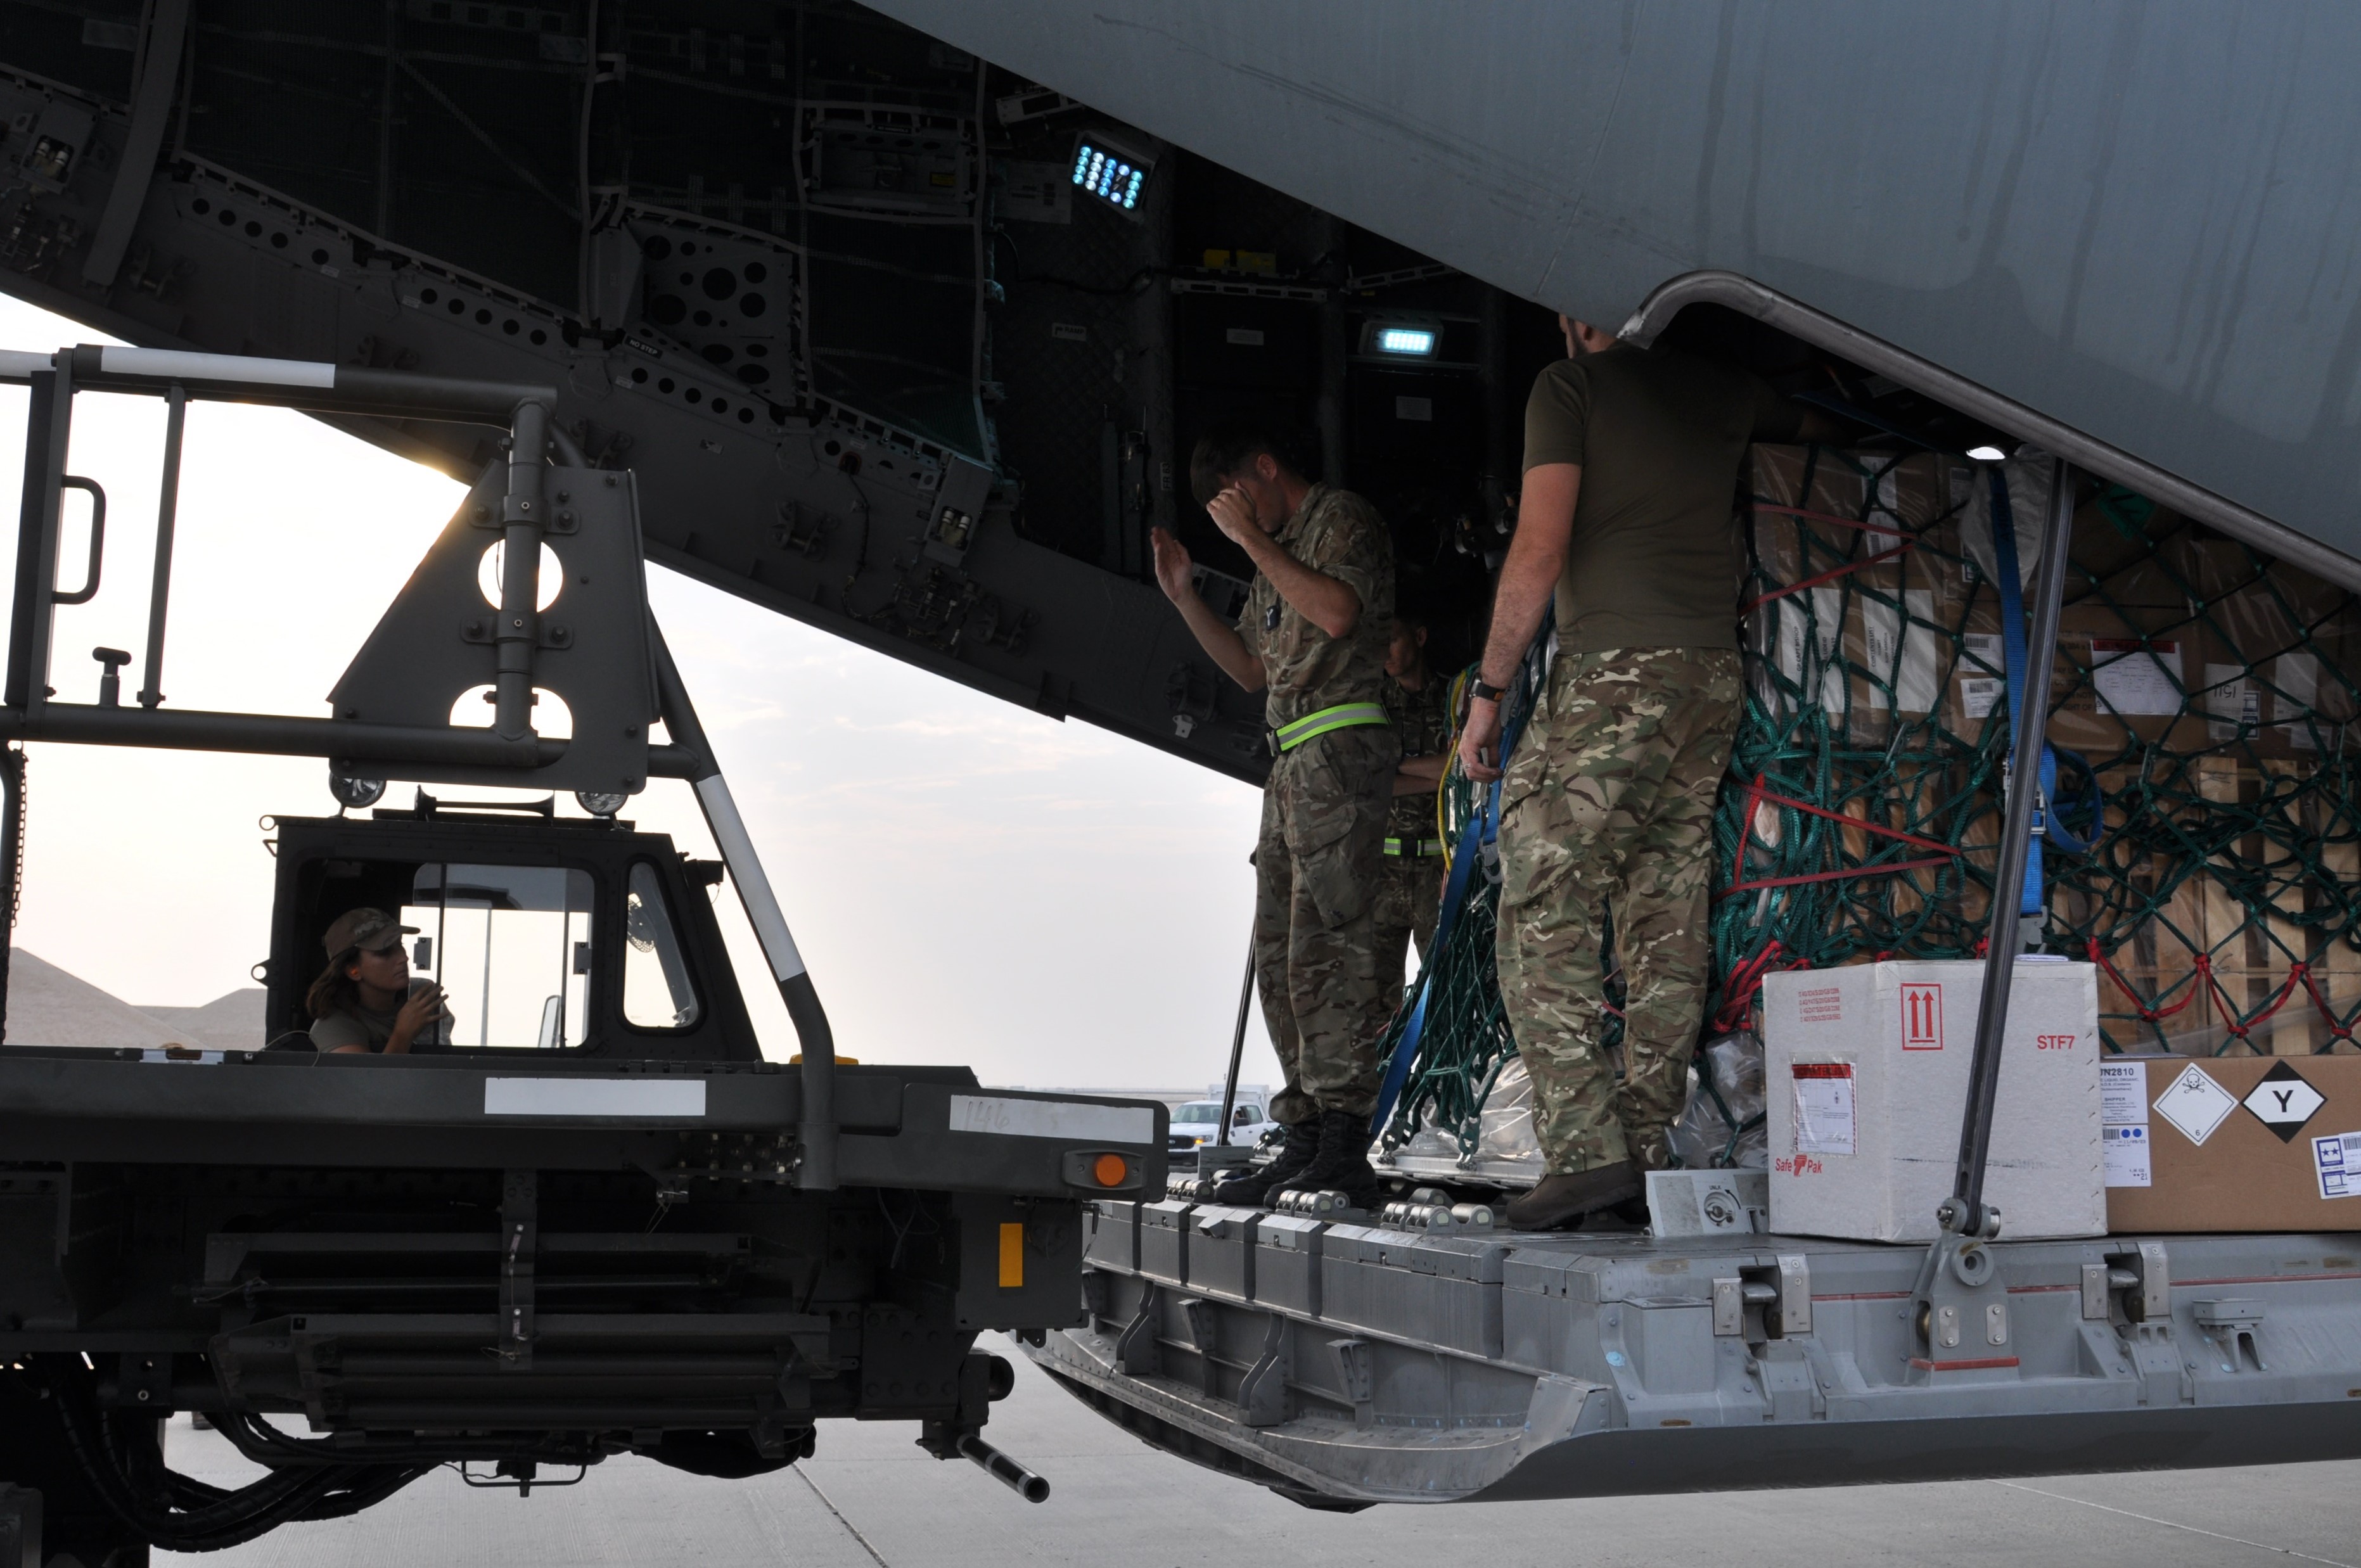 RAF movers loading the Atlas aircraft